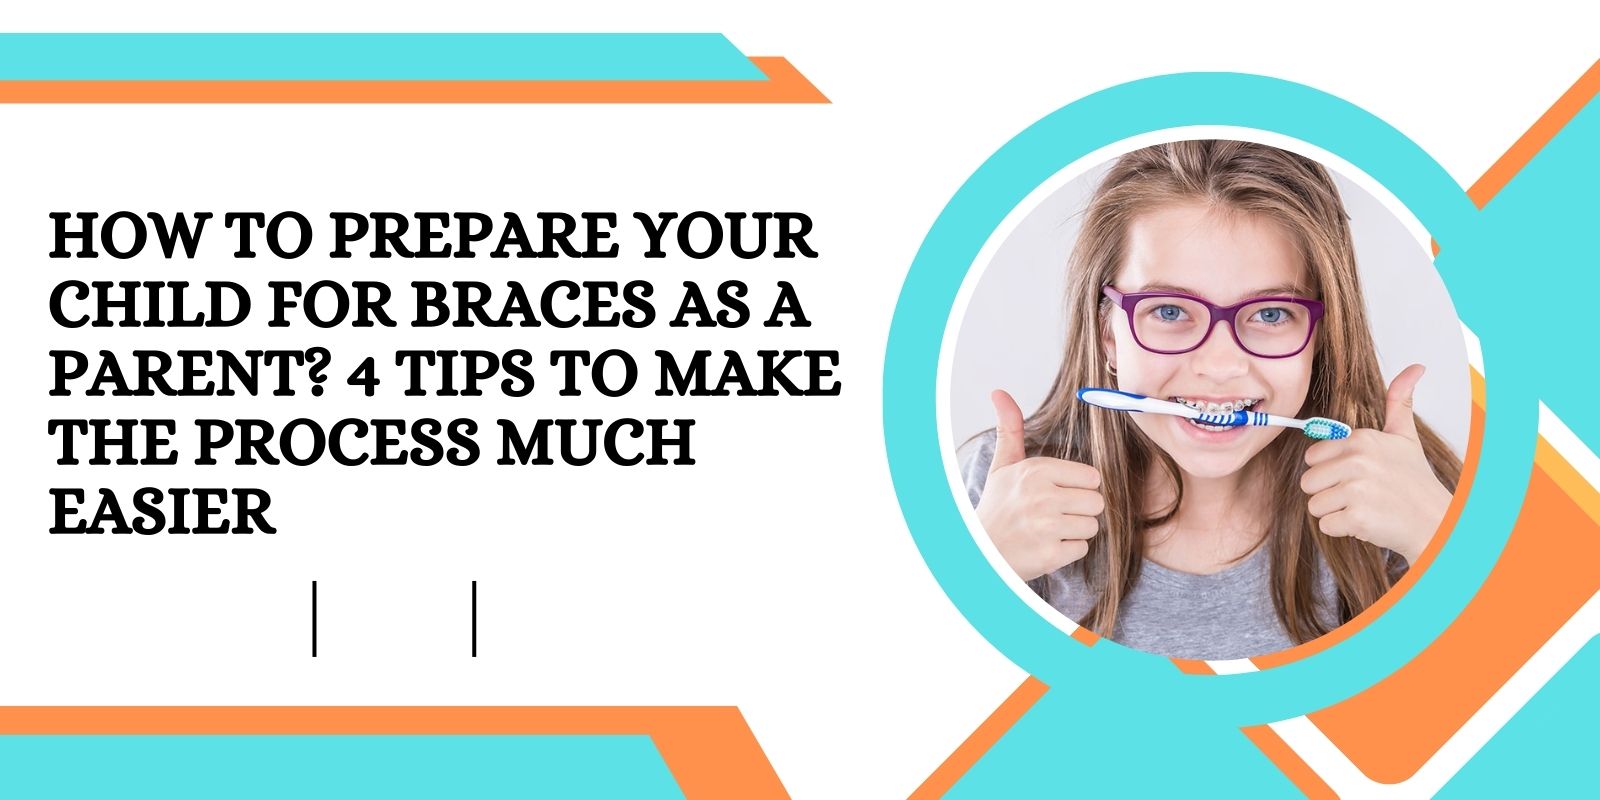 How to Prepare Your Child for Braces as a Parent? 4 Tips to Make the Process Much Easier